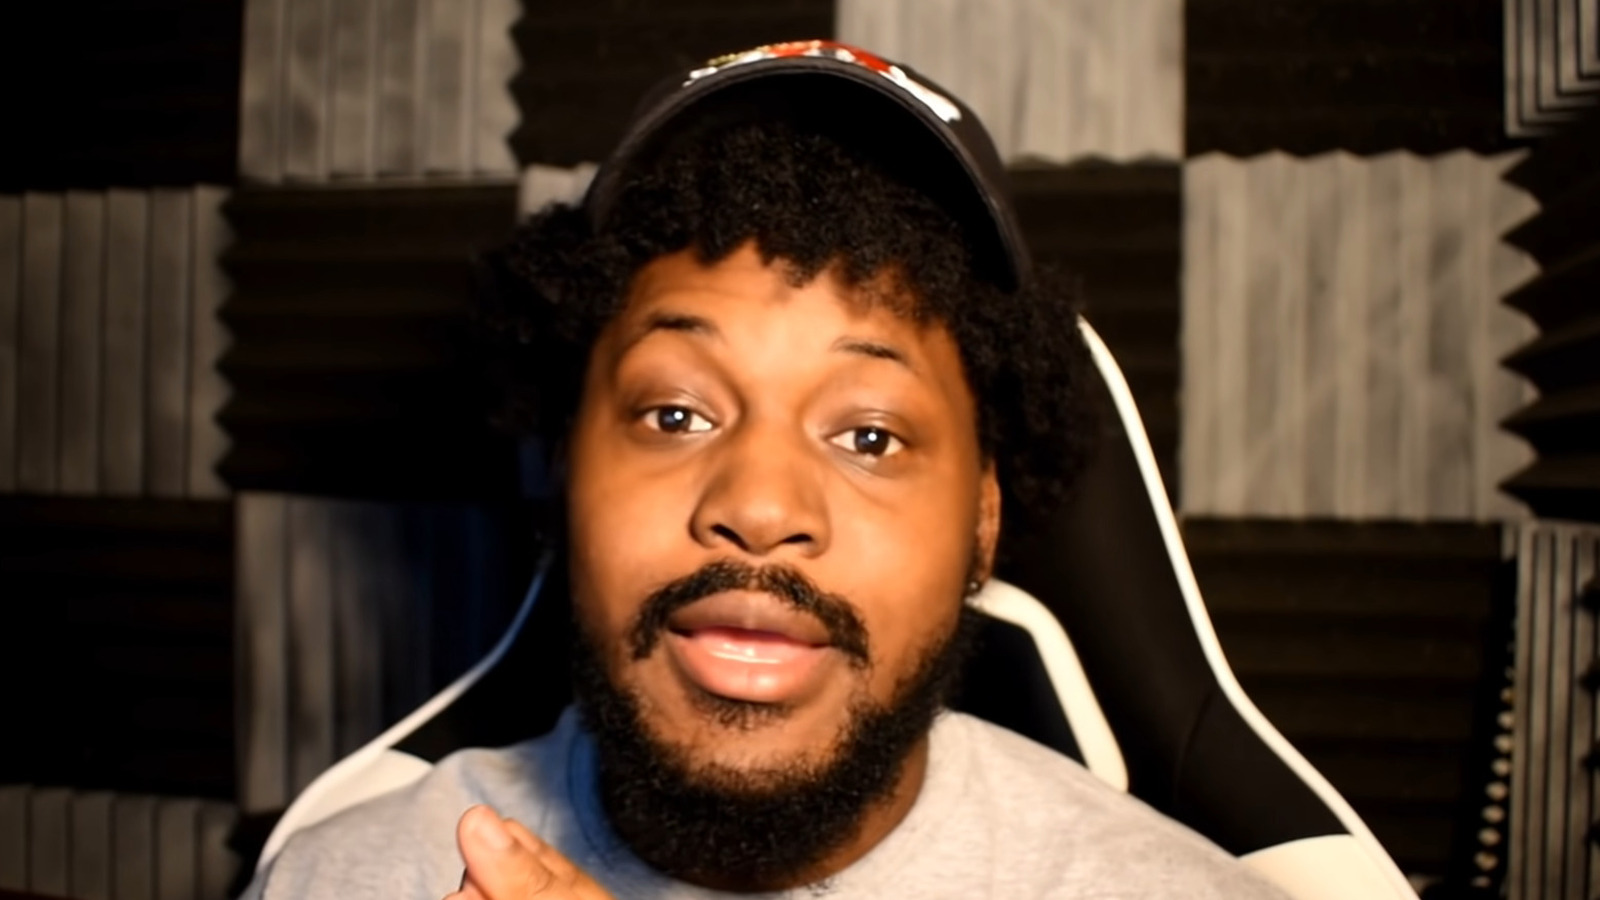 Coryxkenshin sitting on a chair as he speaks during one of his YouTube videos